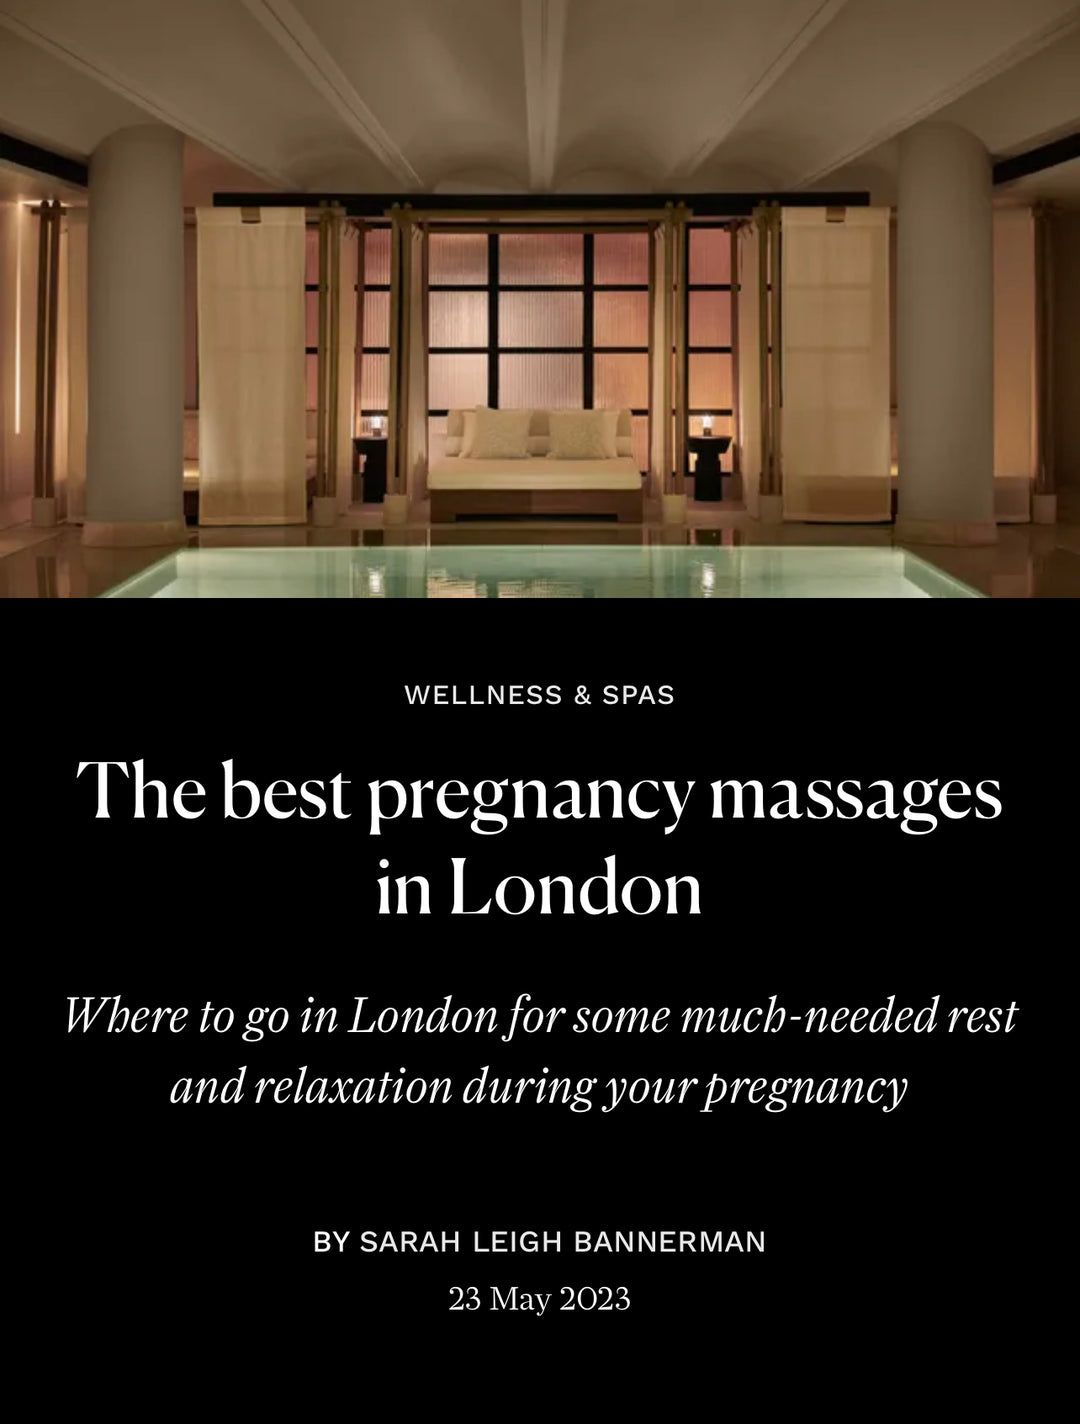 The best pregnancy massages in London